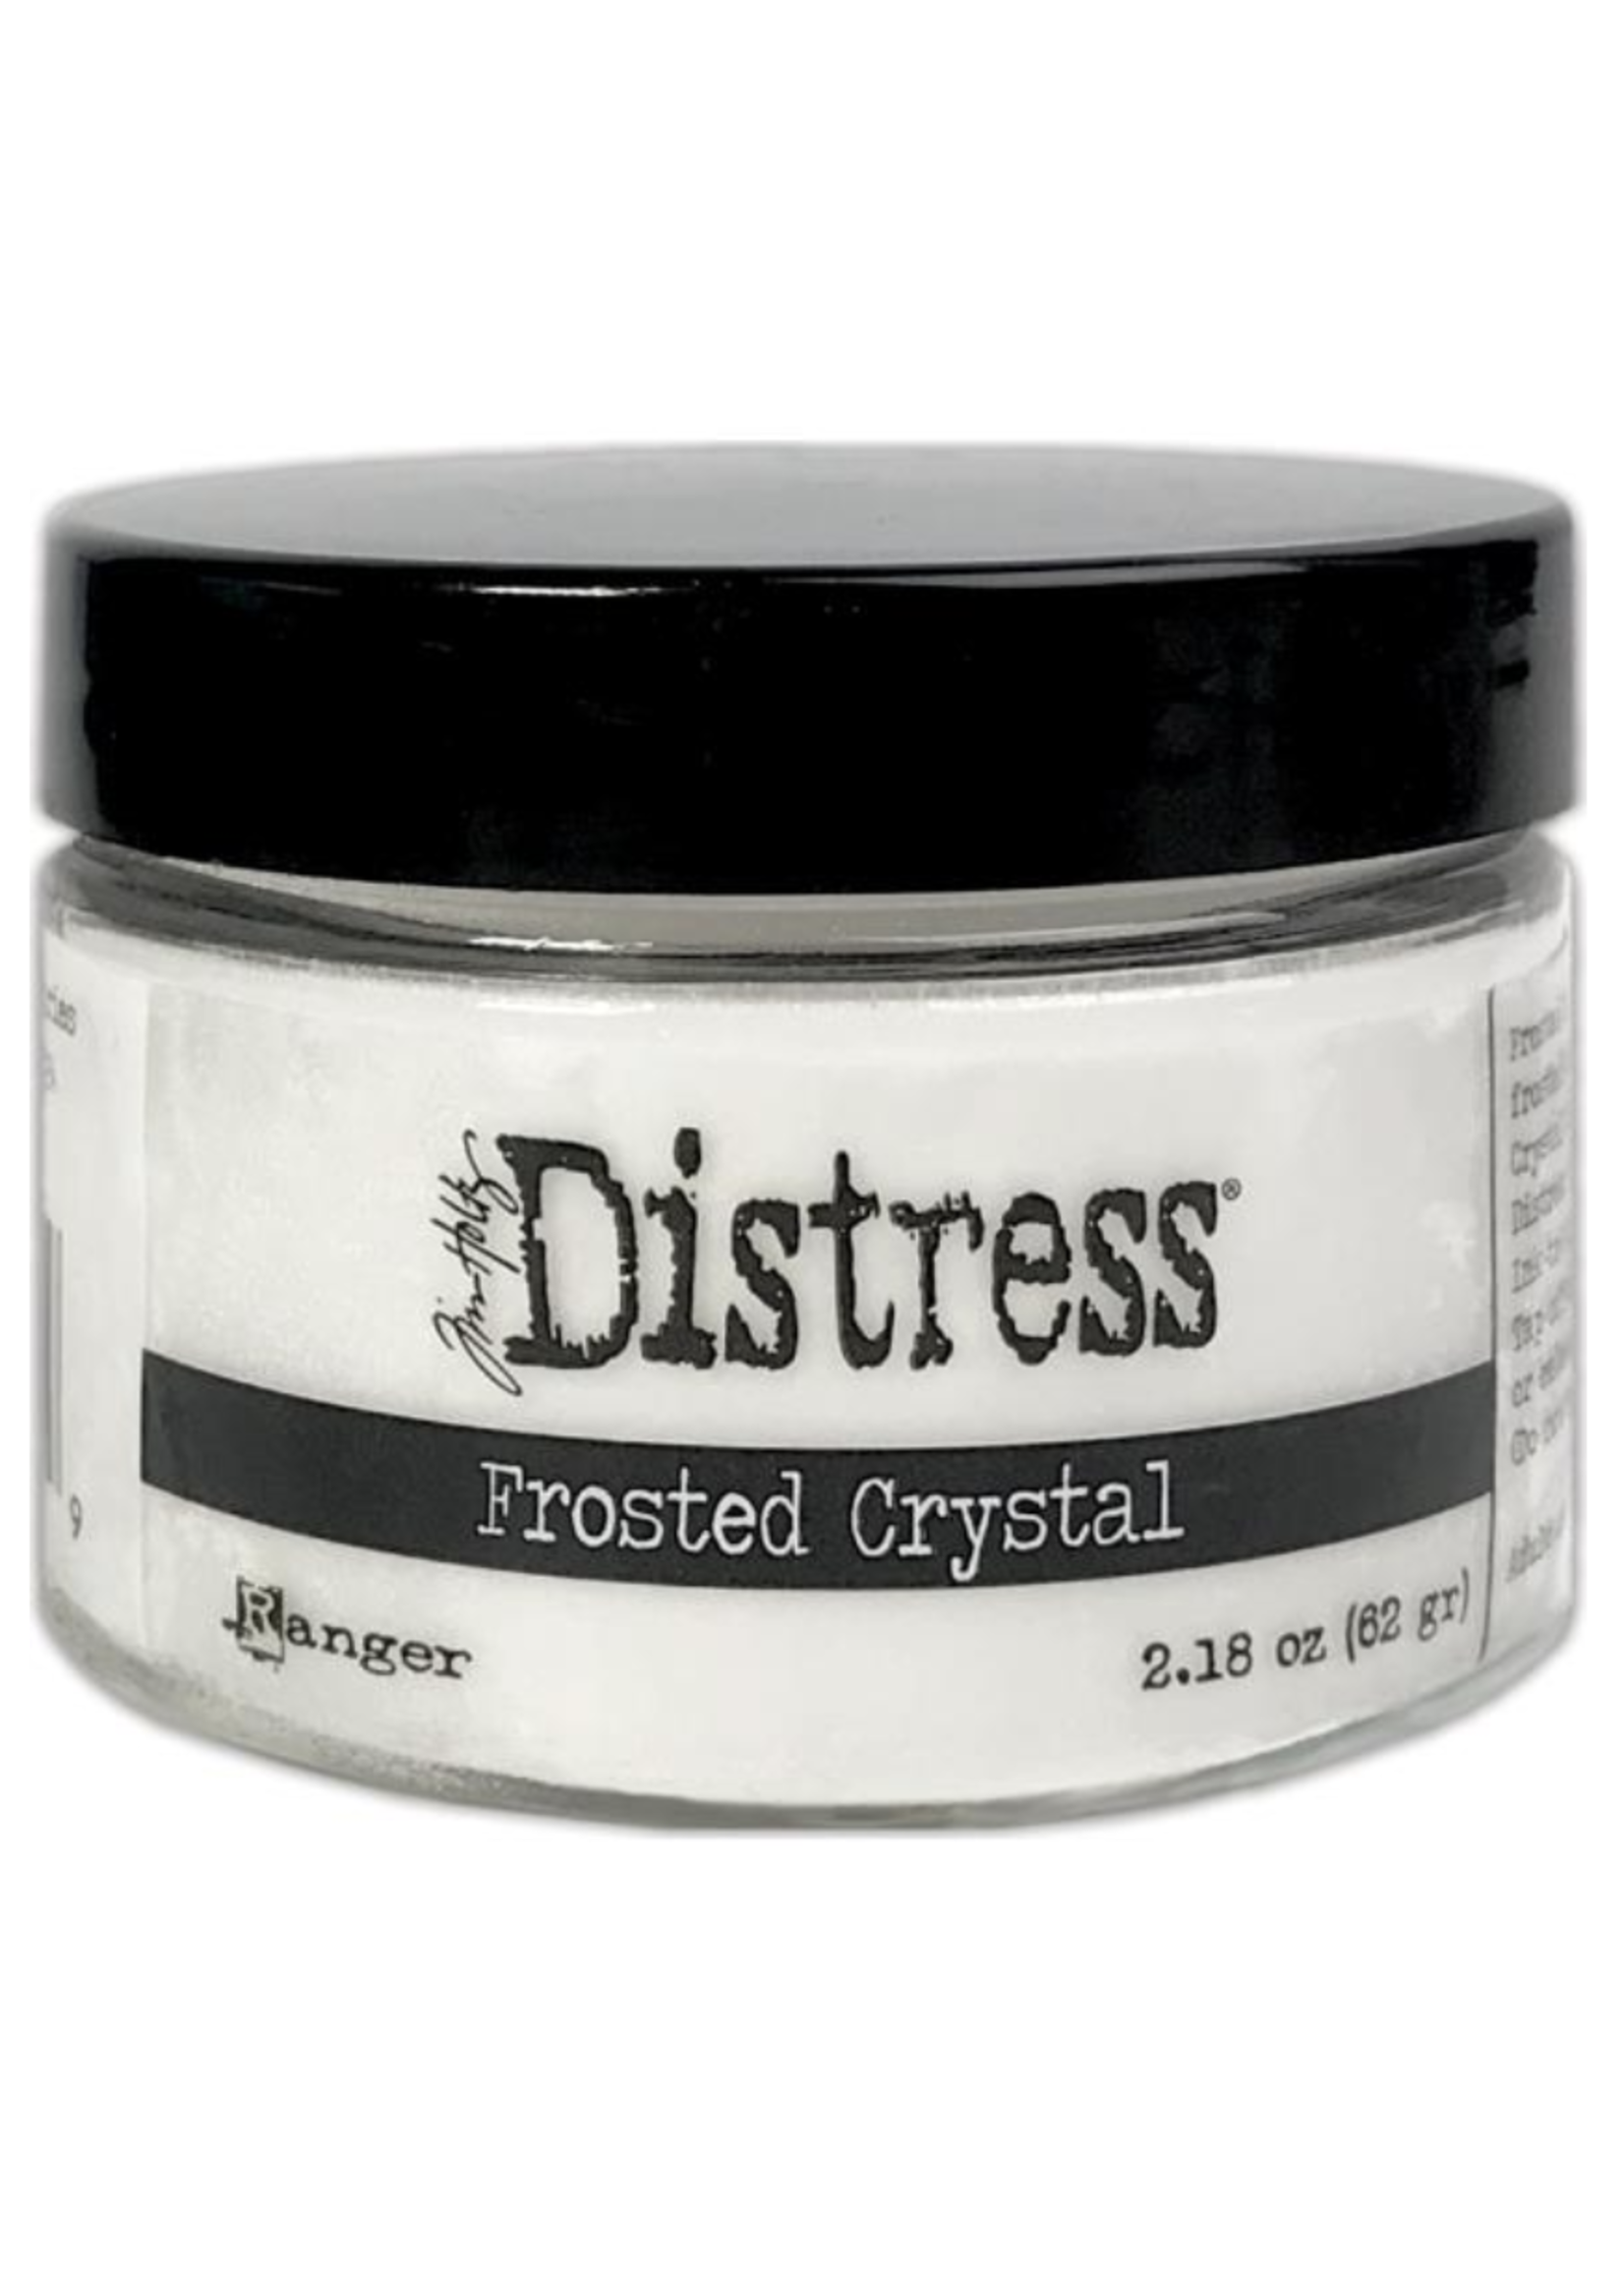 RANGER Distress Frosted Crystal